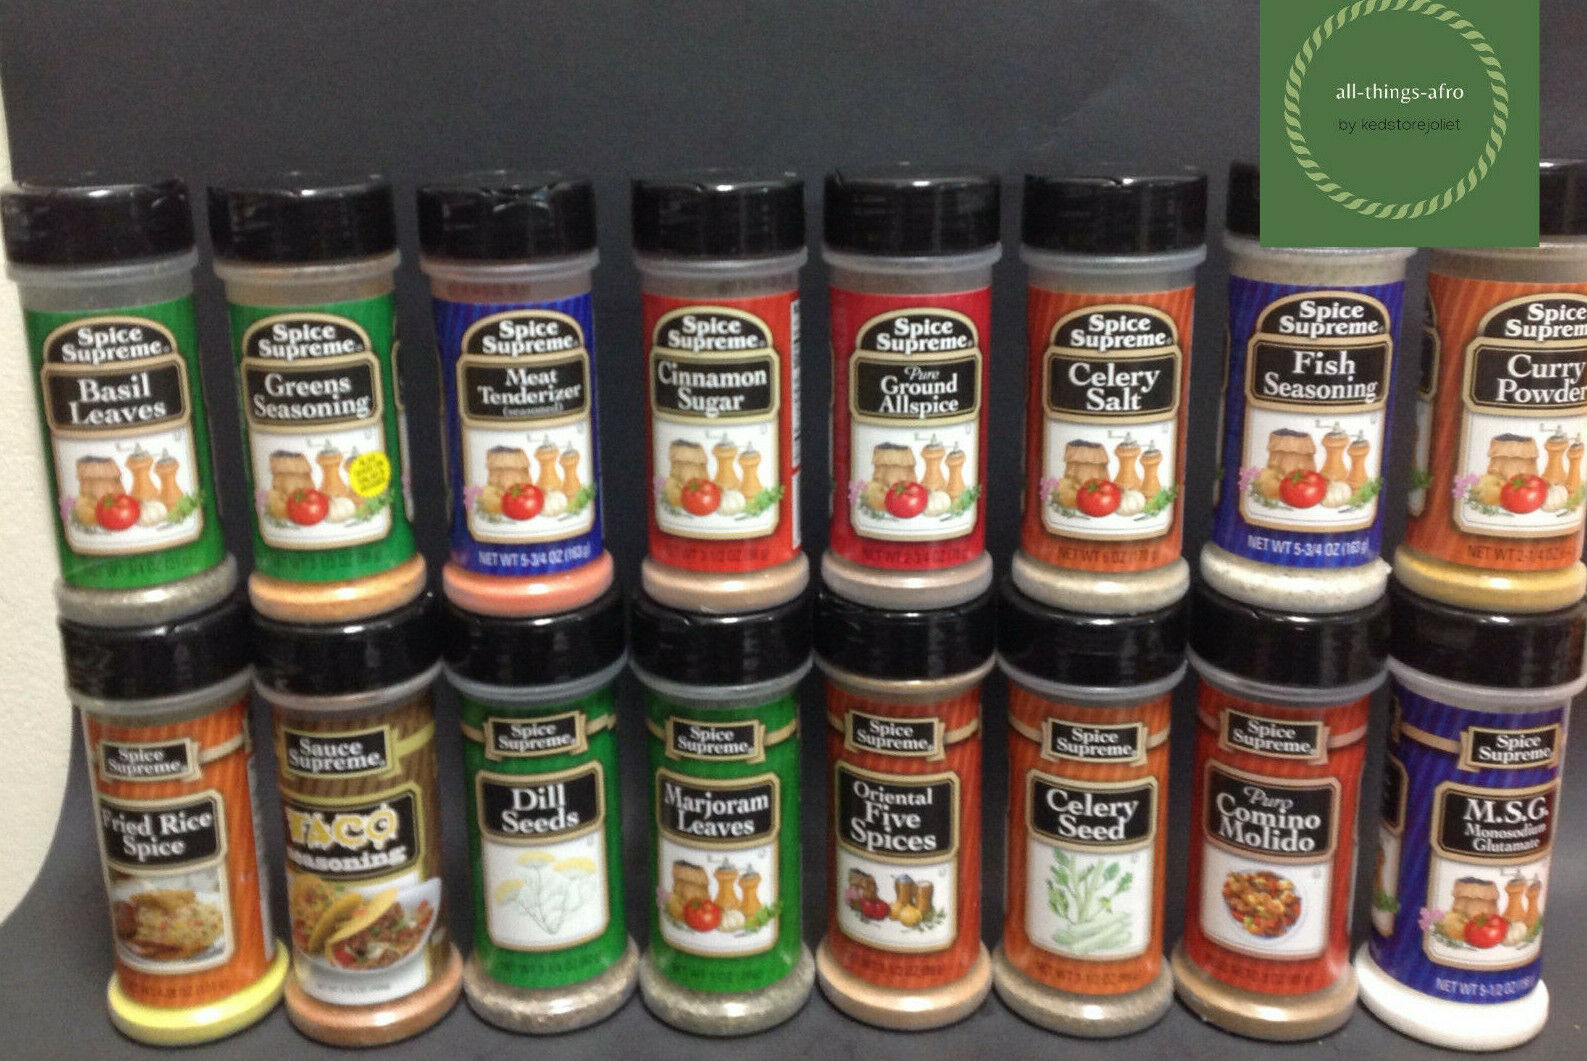 Spice Supreme SEASONING SPICE/USA MADE spices cooking herbs. FREE SHIPPING